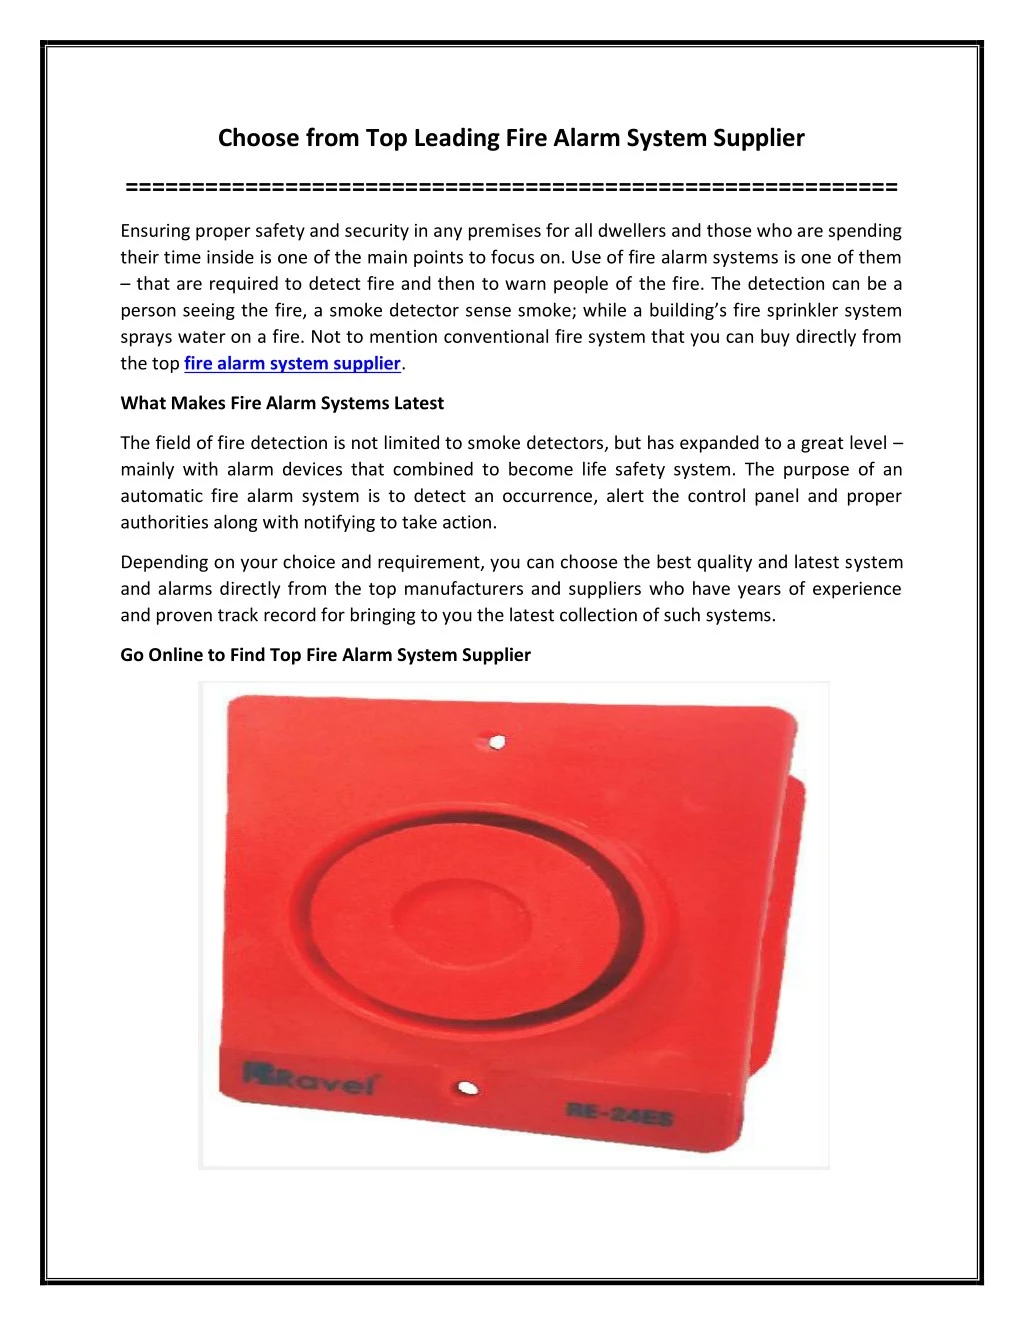 choose from top leading fire alarm system supplier